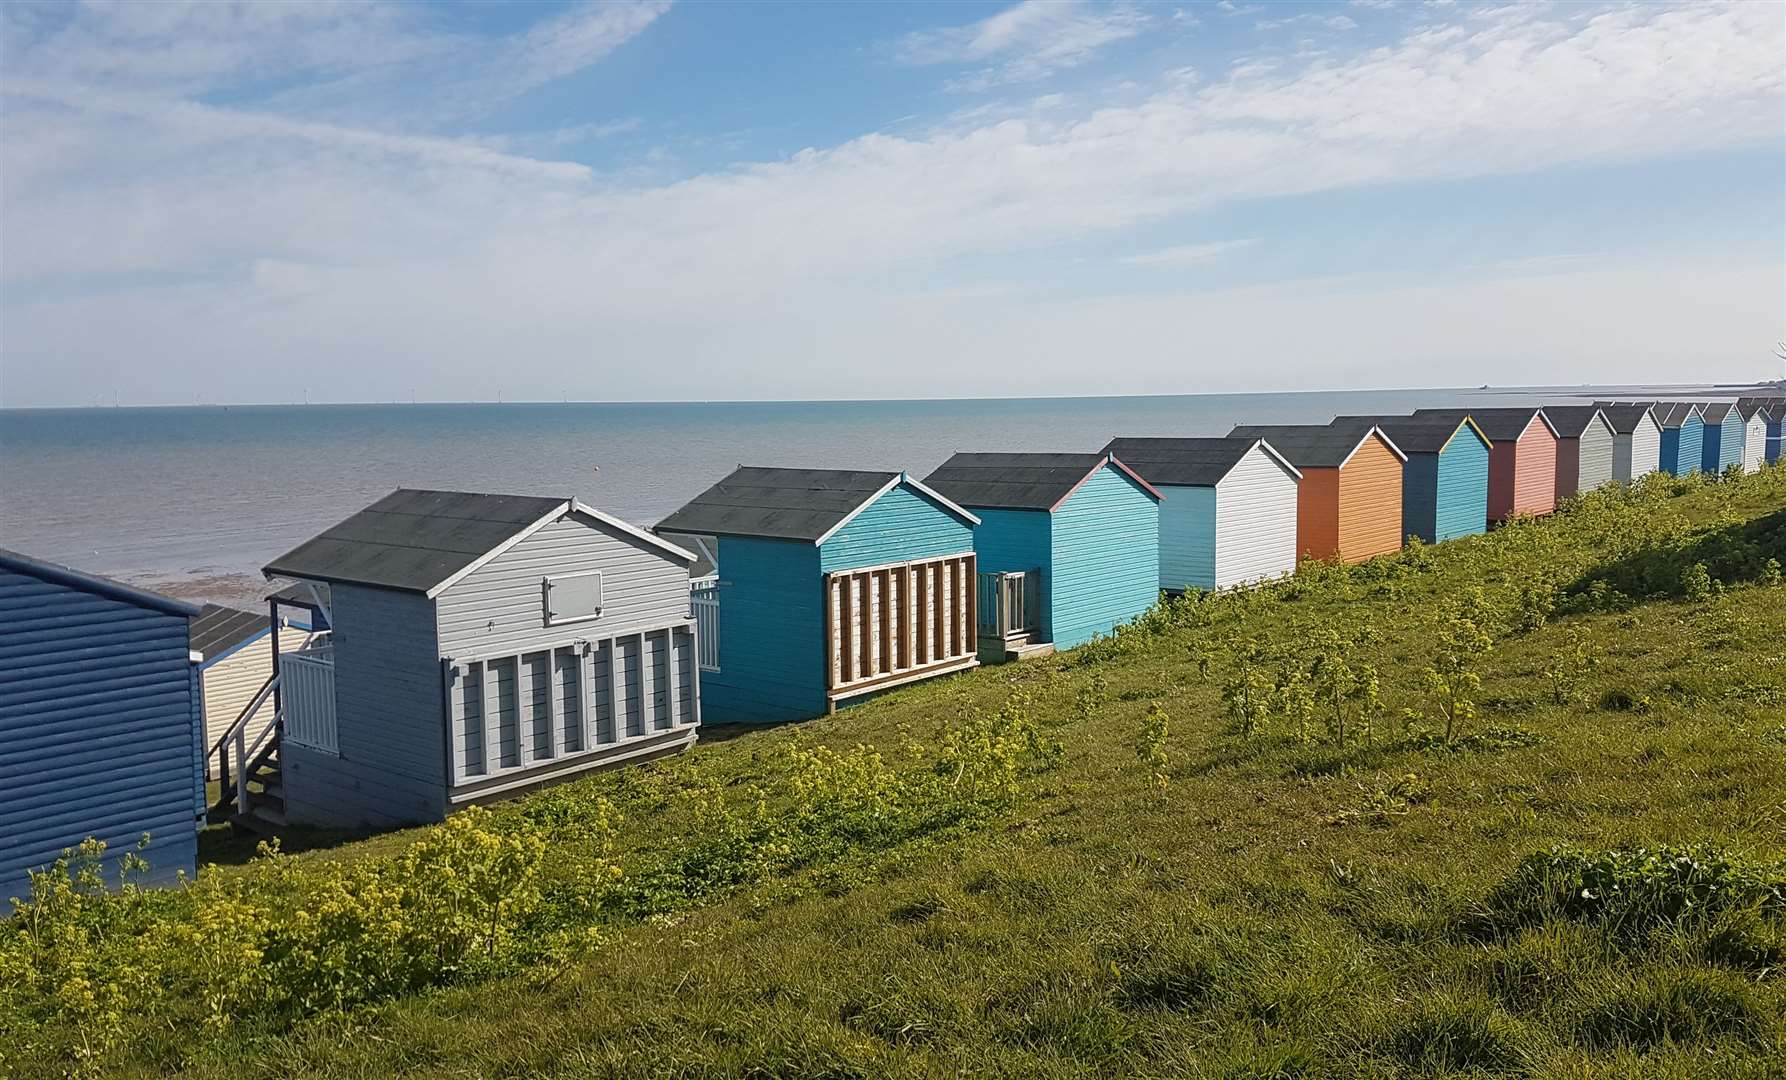 The council wanted to build 20 beach huts in Tankerton, while also adding 94 to Herne Bay